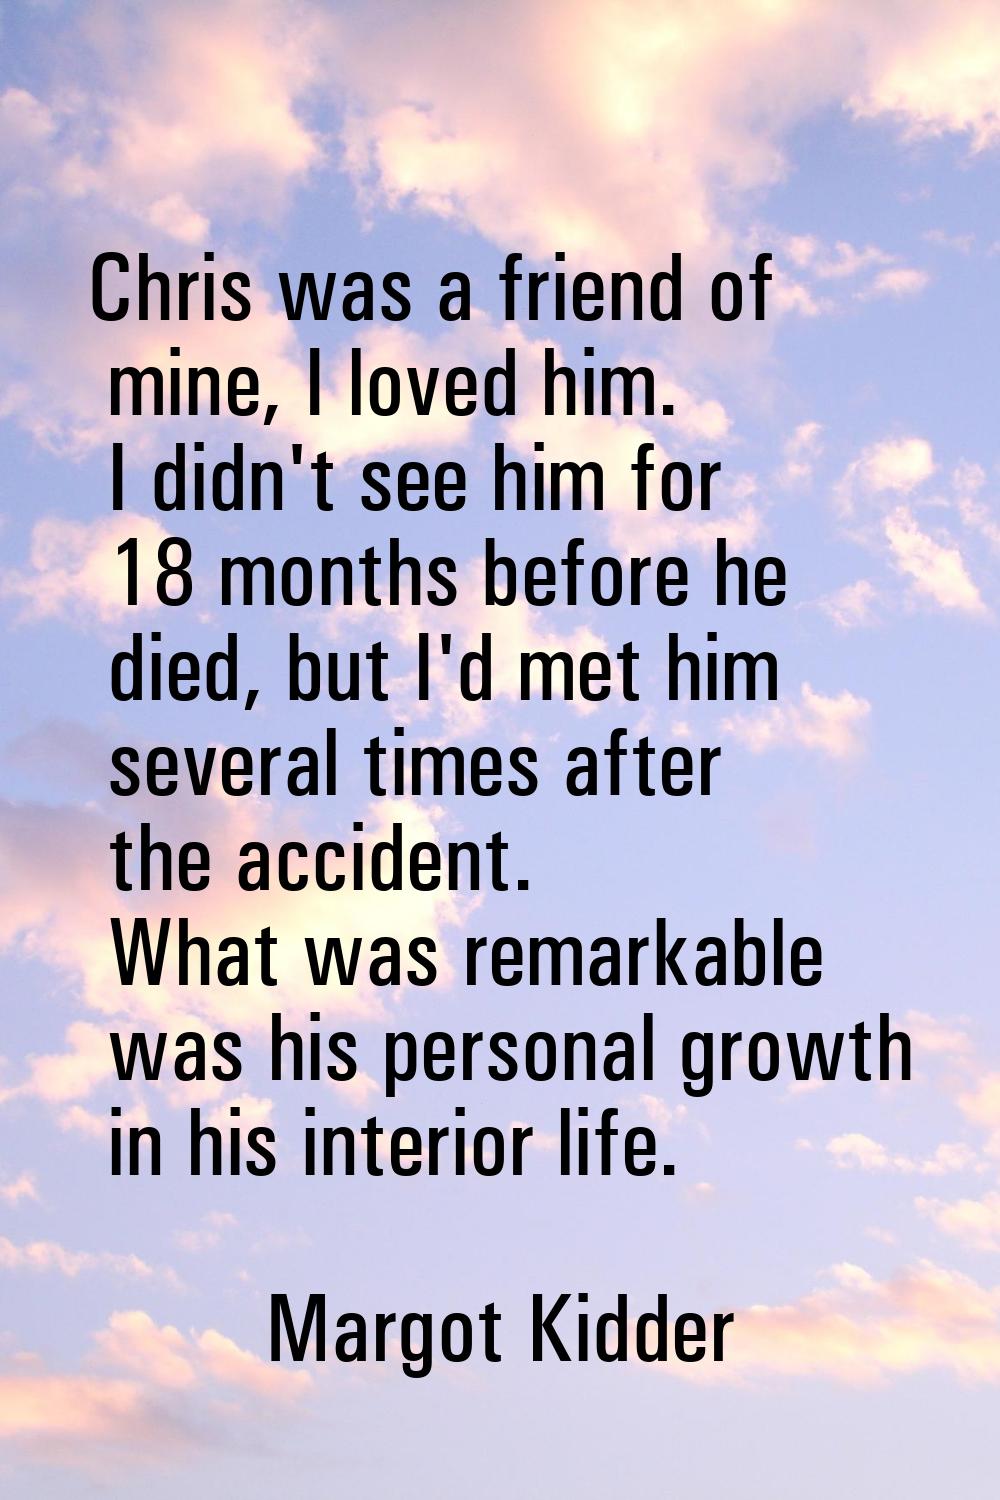 Chris was a friend of mine, I loved him. I didn't see him for 18 months before he died, but I'd met